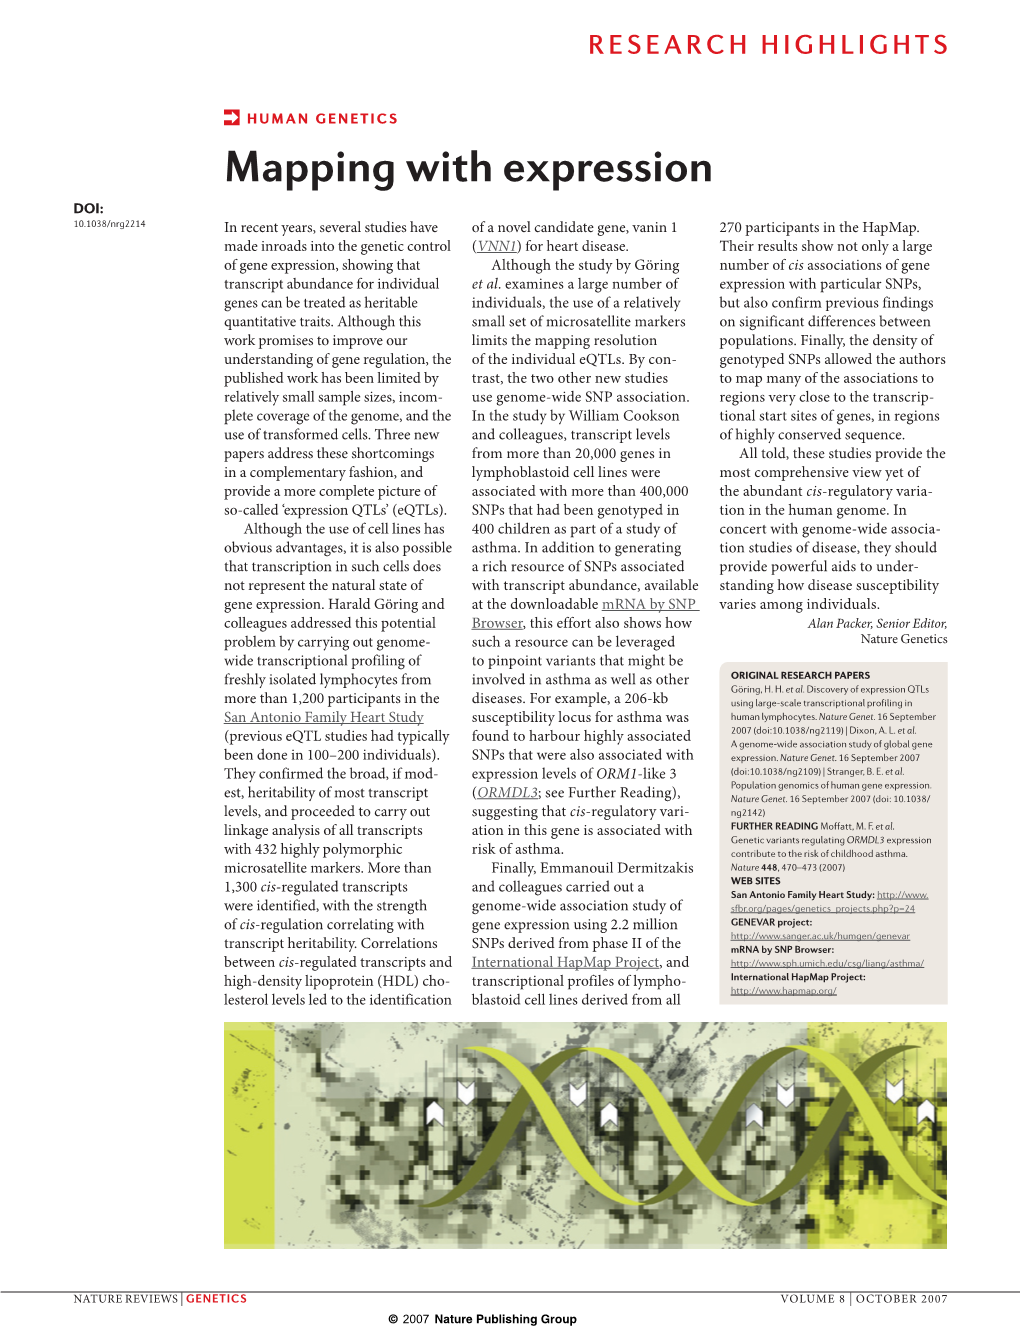 Mapping with Expression DOI: 10.1038/Nrg2214 in Recent Years, Several Studies Have of a Novel Candidate Gene, Vanin 1 270 Participants in the Hapmap